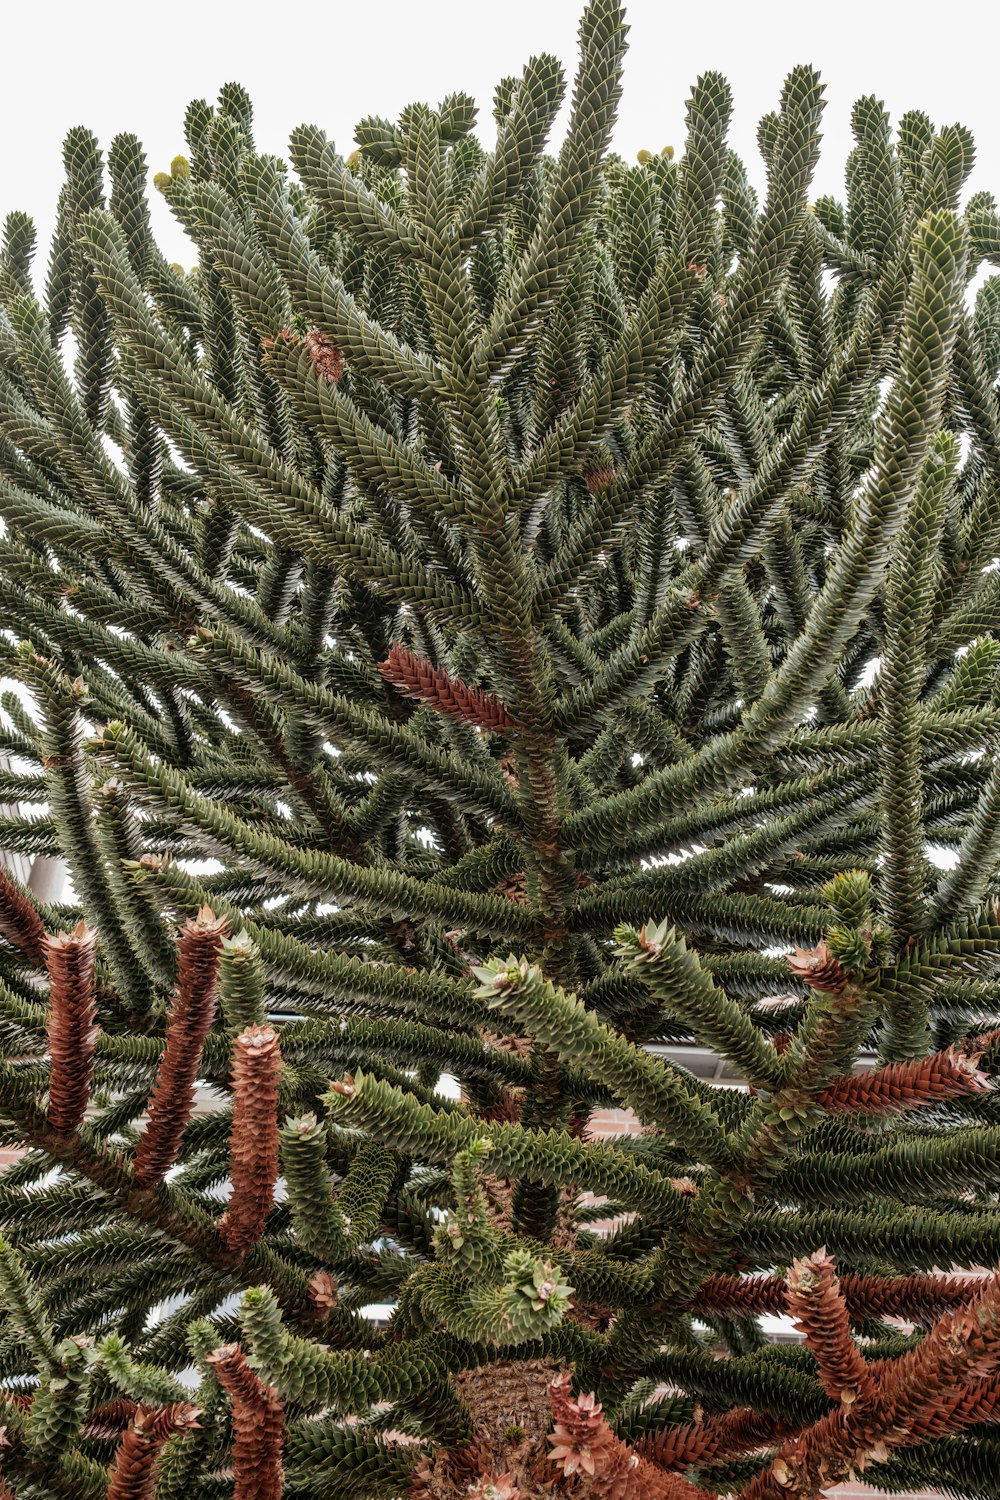 a close up of a pine tree with lots of needles